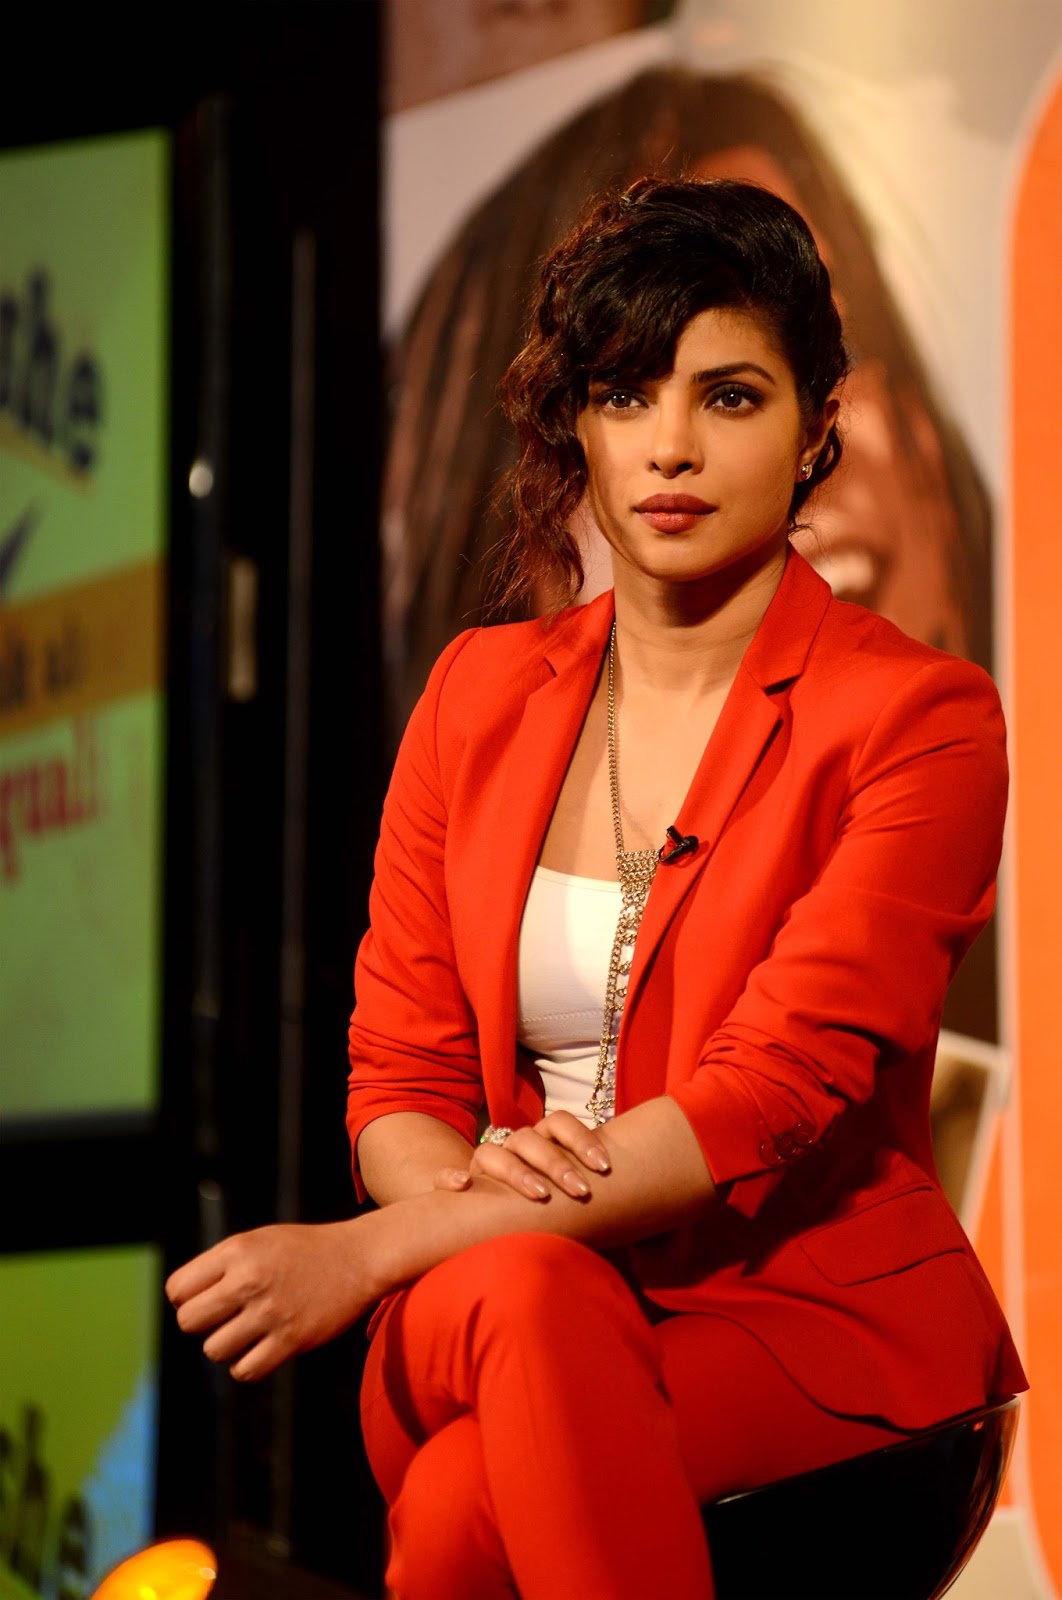 Priyanka Chopra Looks Super Hot In Red Suit  At 'NDTV Vedanta Our Girls Our Pride' Campaign Launch in New Delhi